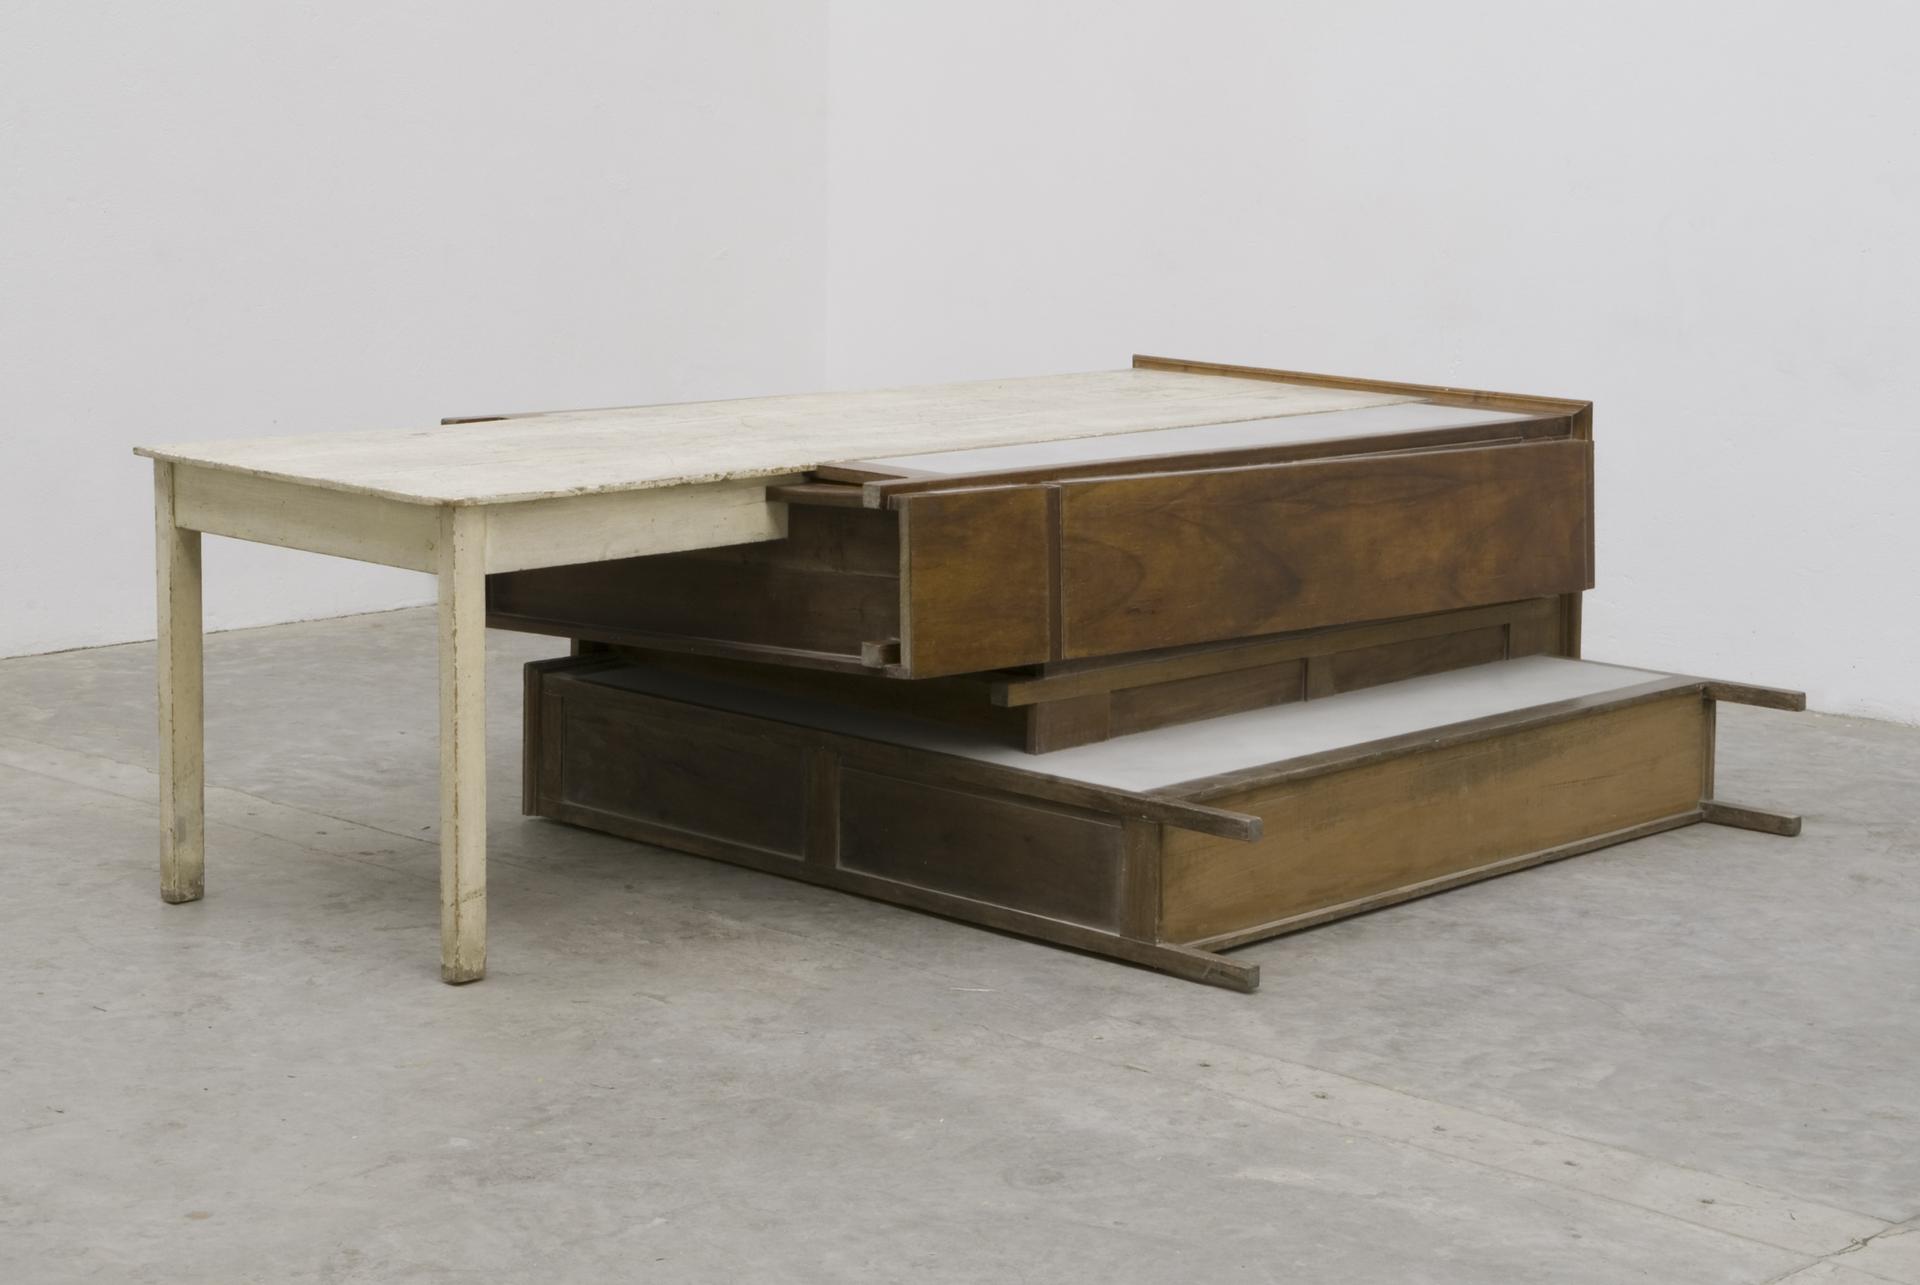 Doris Salcedo's untitled sculpture inspired by stories of the victims of violence in Colombia's war. Art is "giving dignity back. So it is doing the opposite of what violence does,” she says.